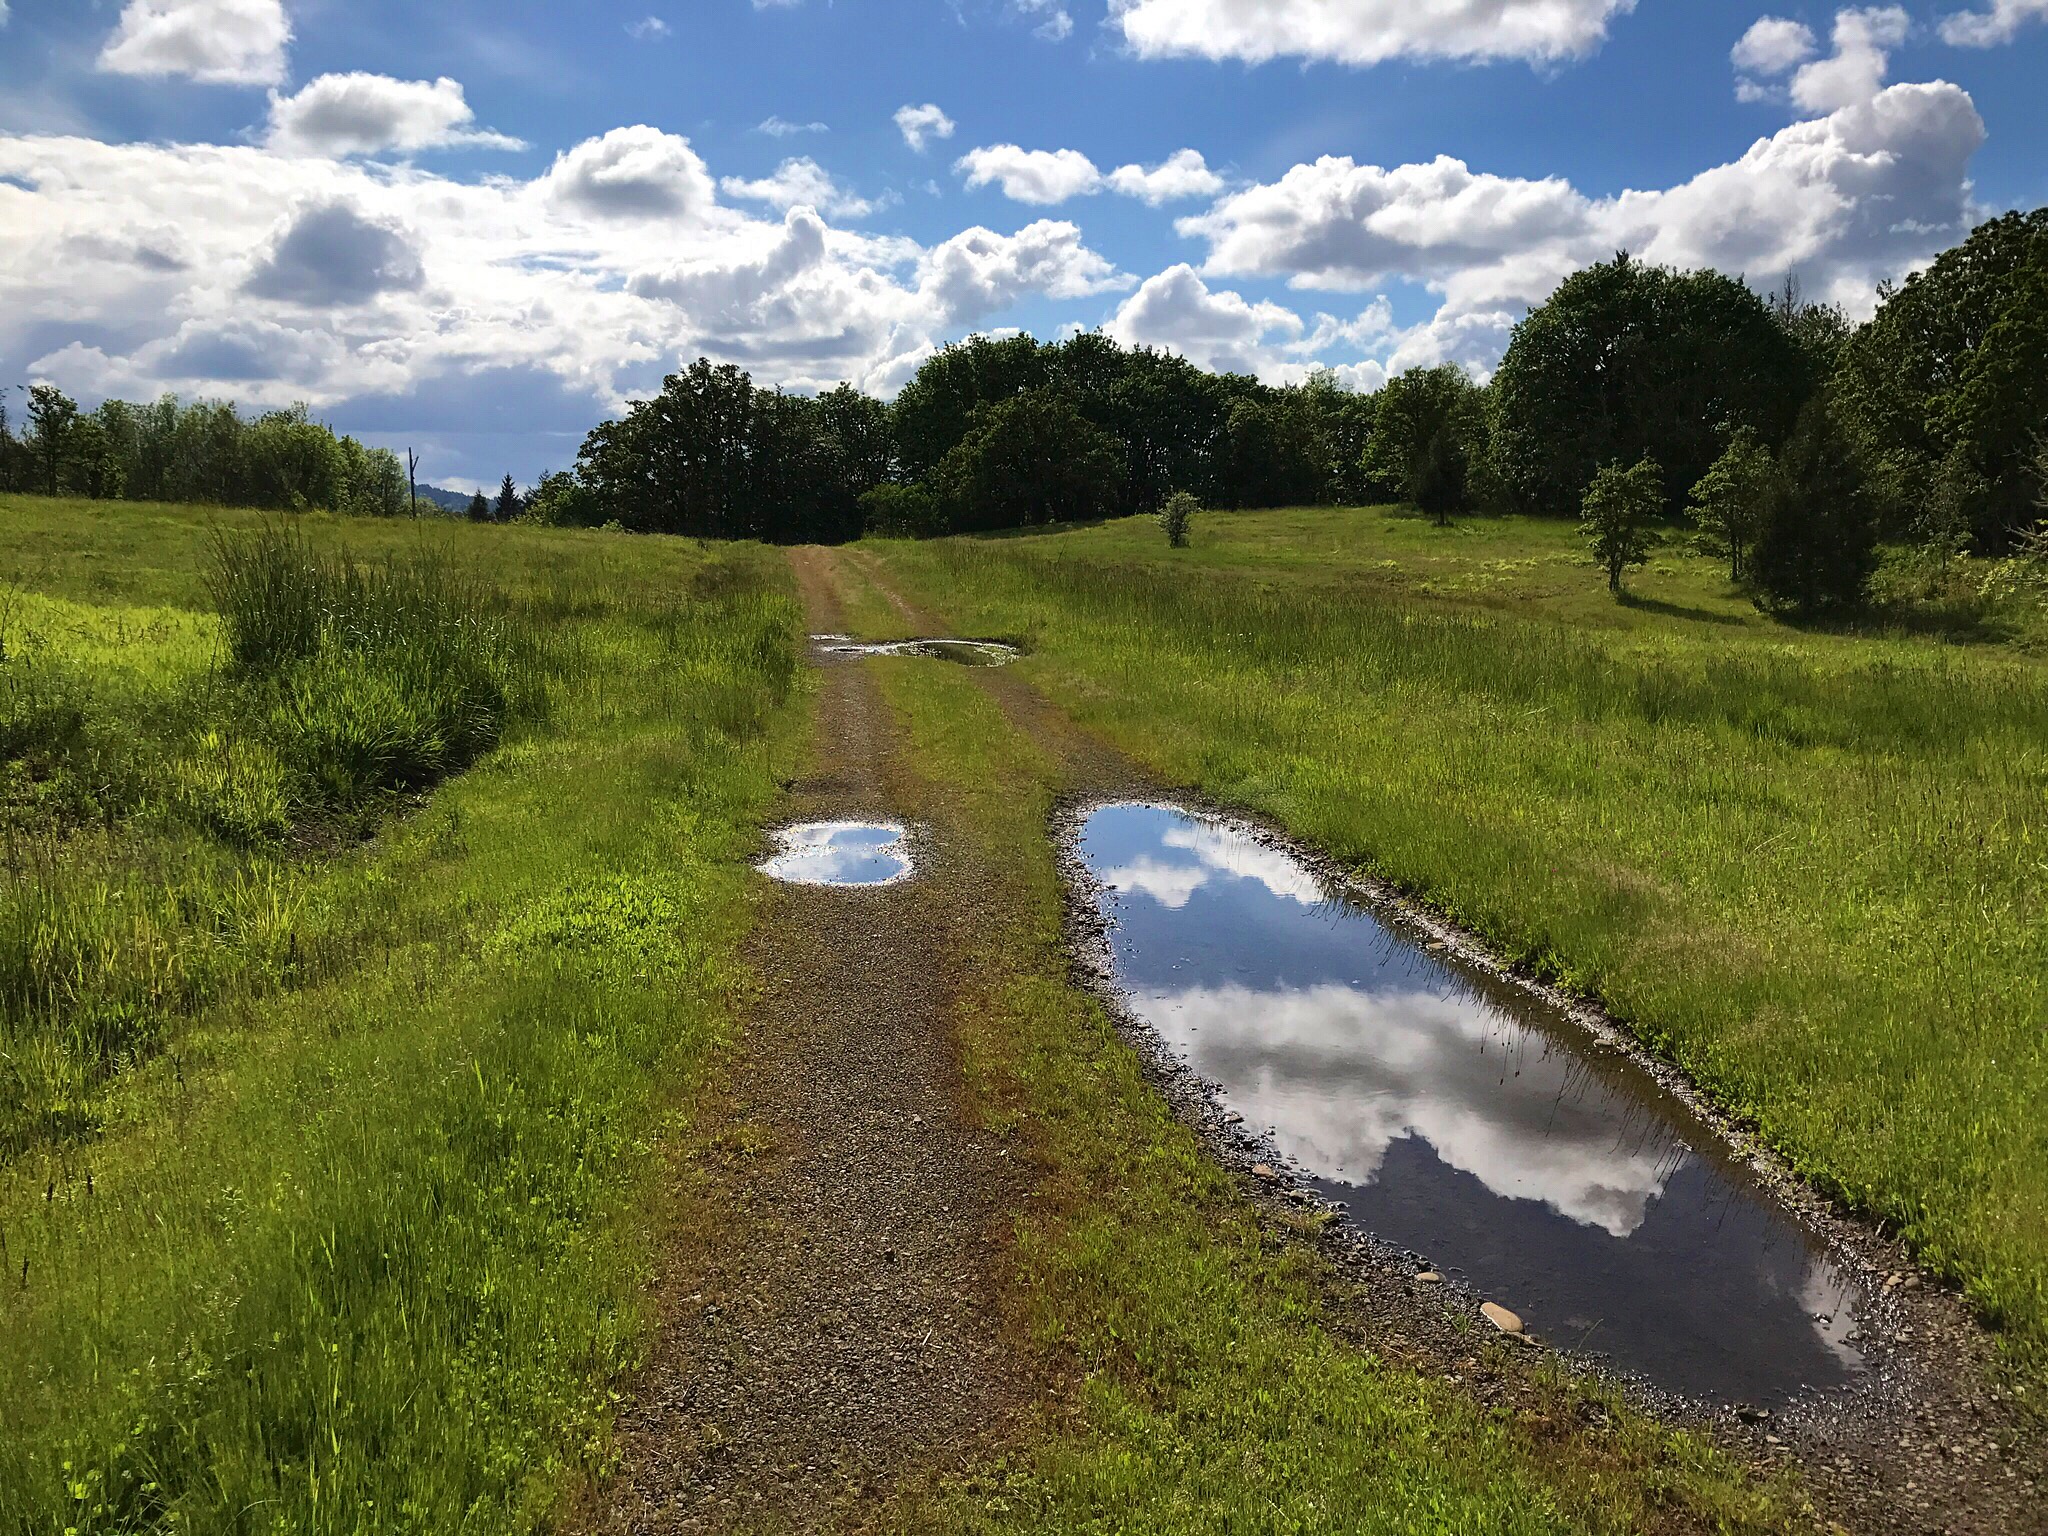 Sky Puddles on a remote country lane on the north side of Mt. Pisgah where I had never gone before.